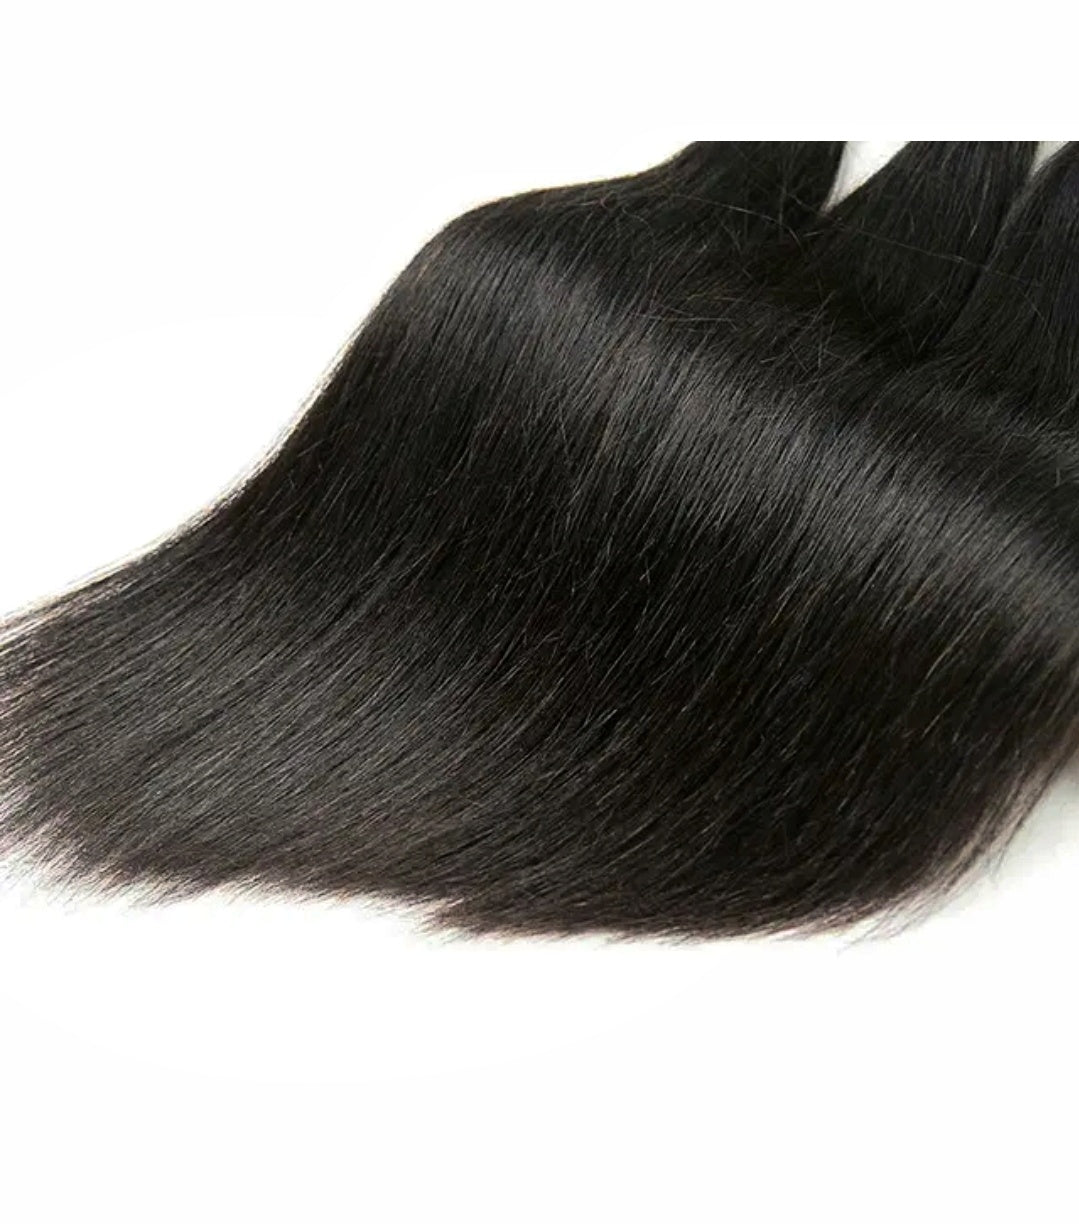 Texture Weft Hair Extensions